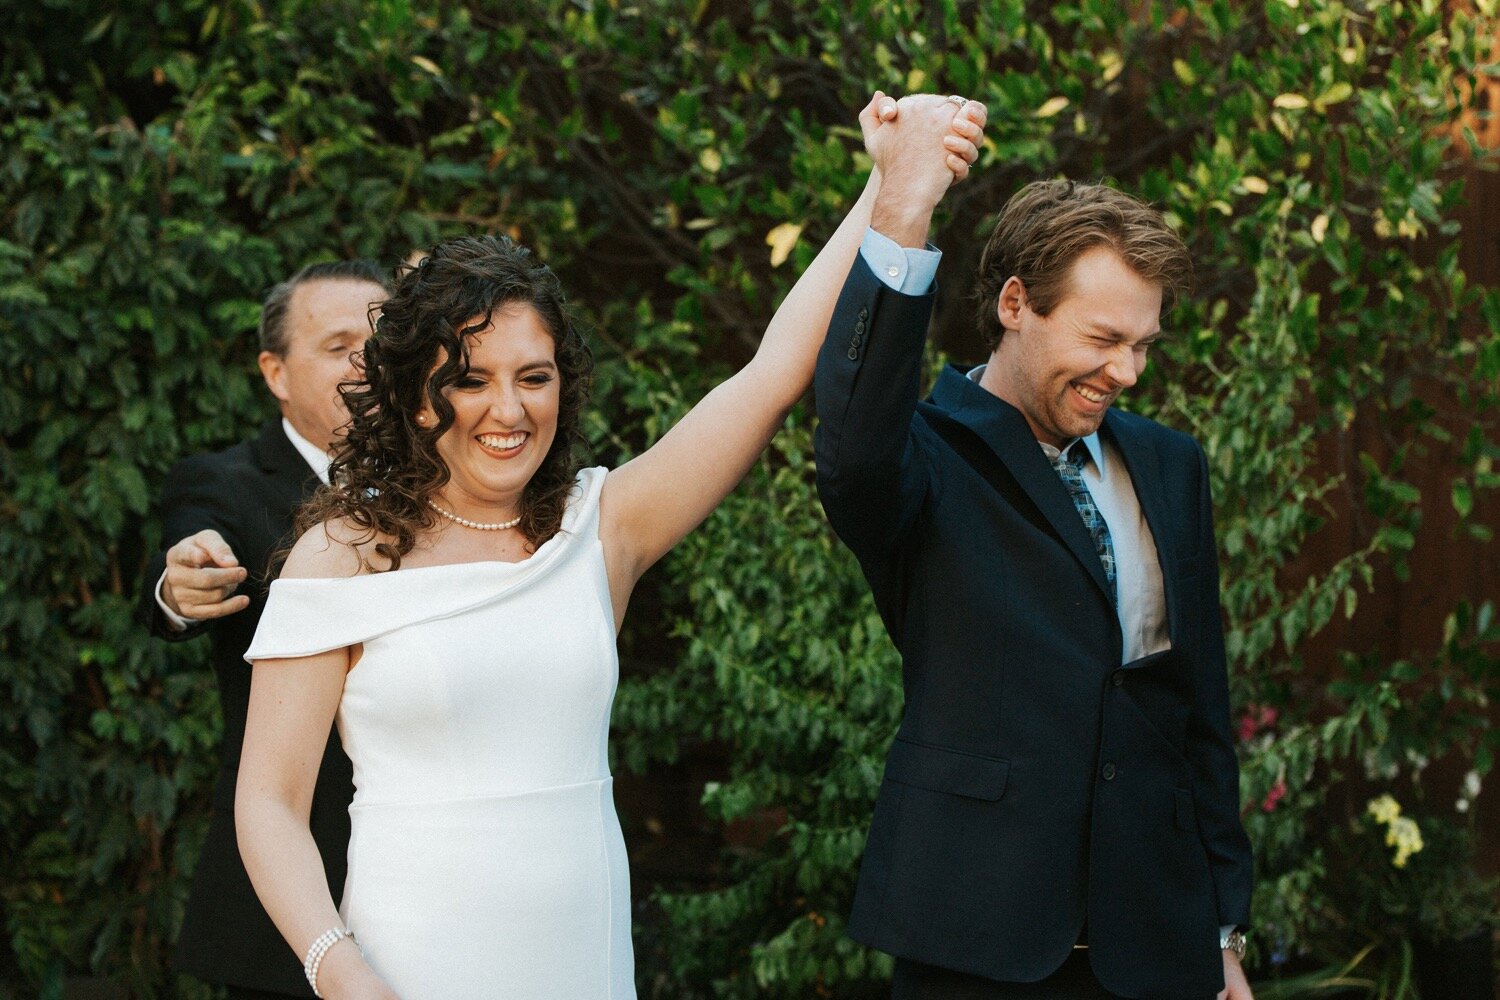  bride and groom are elated after being pronounced husband and wife in an intimate backyard wedding ceremony in los angeles california. central coast wedding photography duo poppy and vine captured the moment 